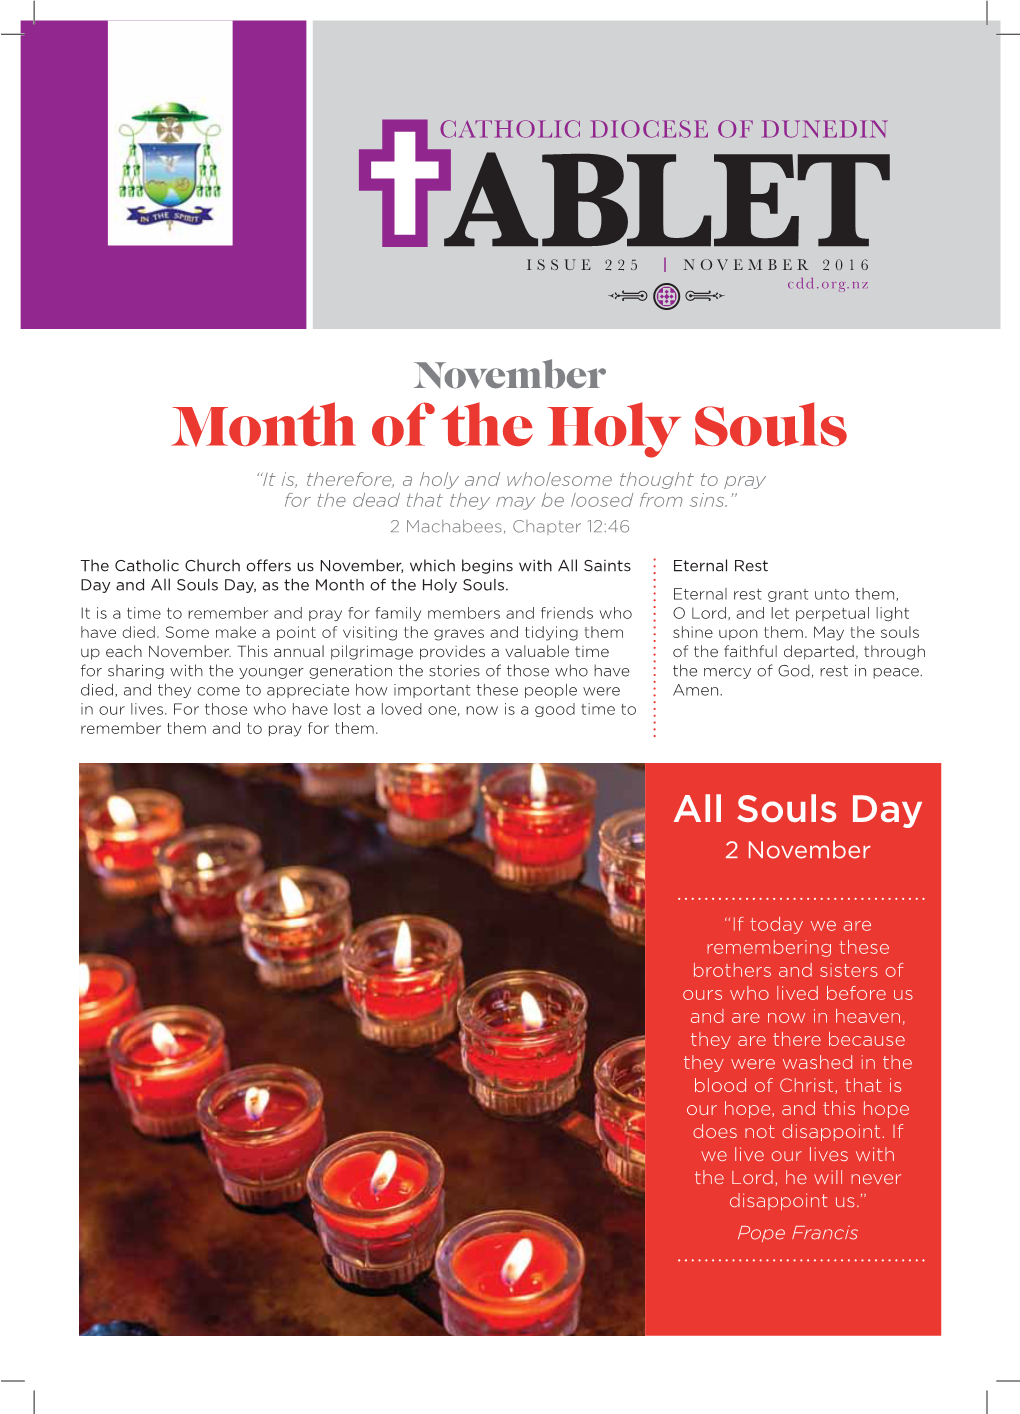 Month of the Holy Souls “It Is, Therefore, a Holy and Wholesome Thought to Pray for the Dead That They May Be Loosed from Sins.” 2 Machabees, Chapter 12:46